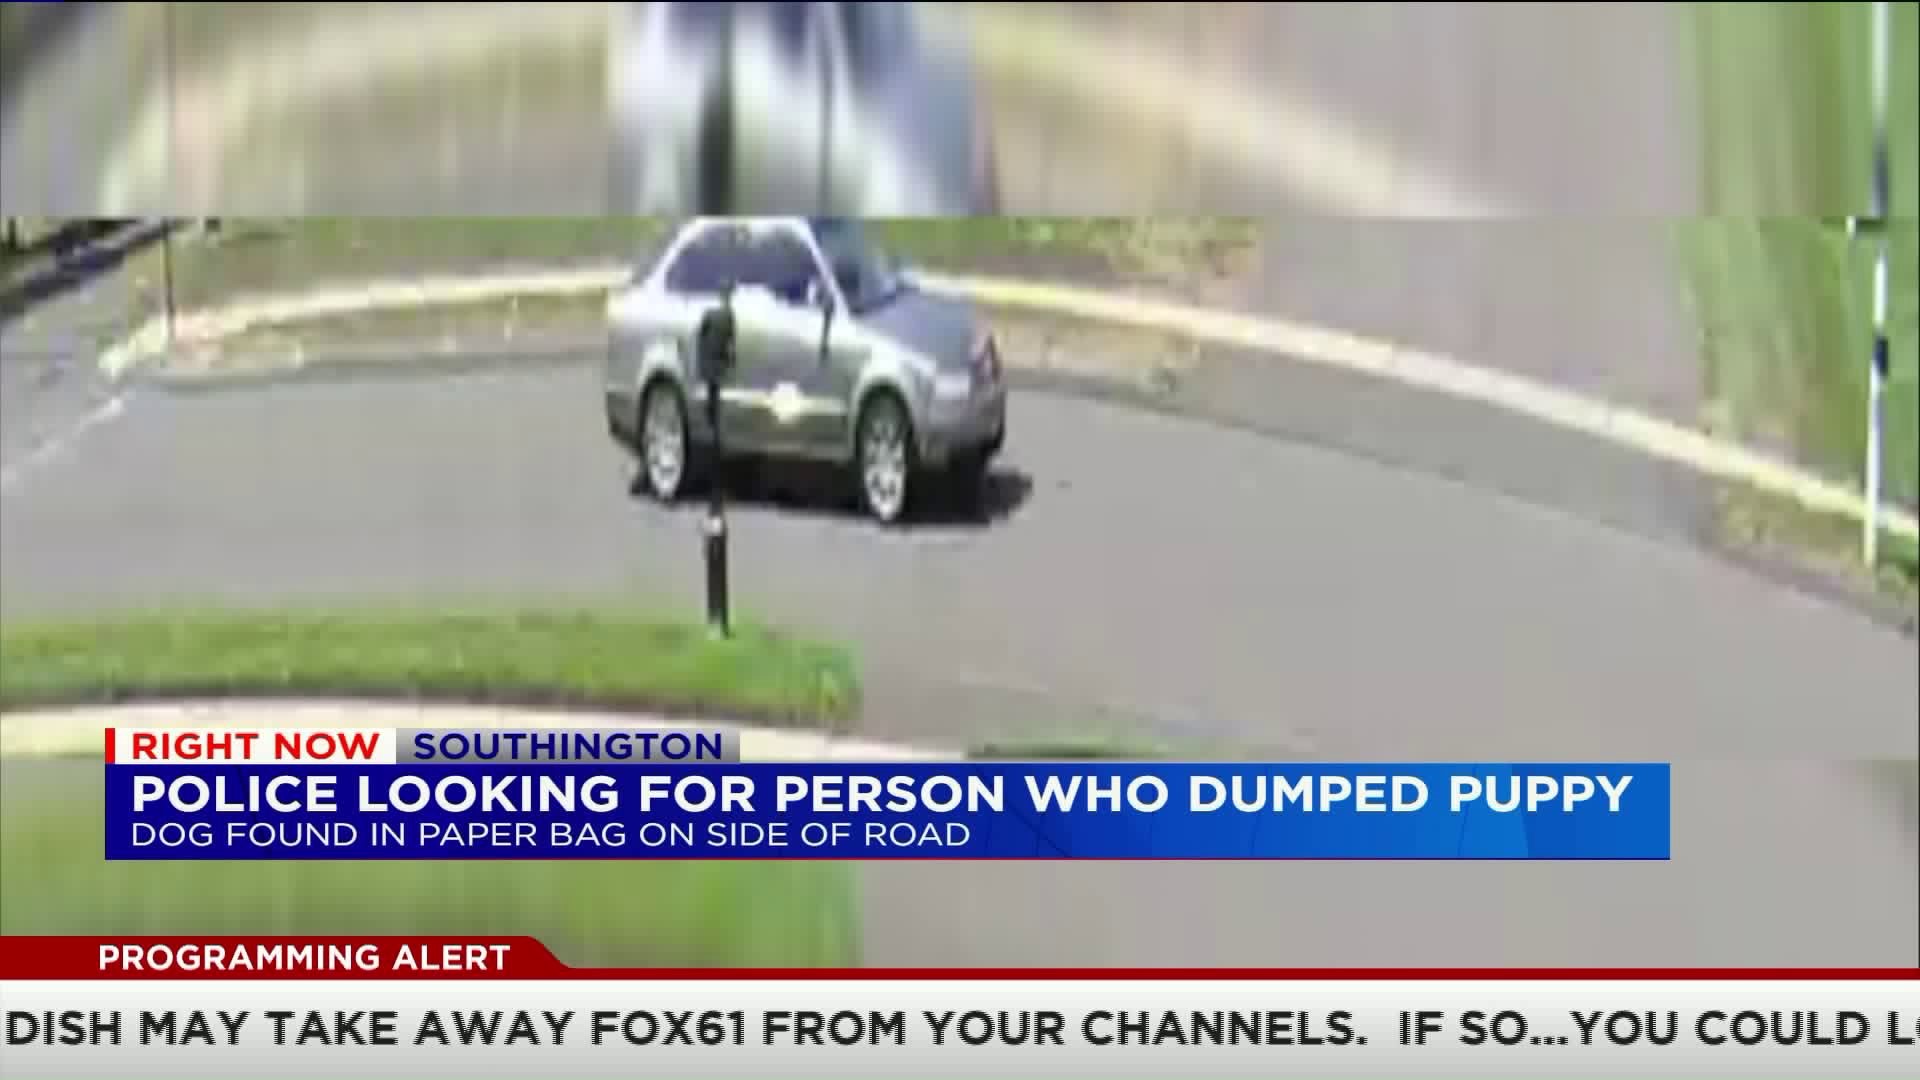 Police looking for person who dumped dog